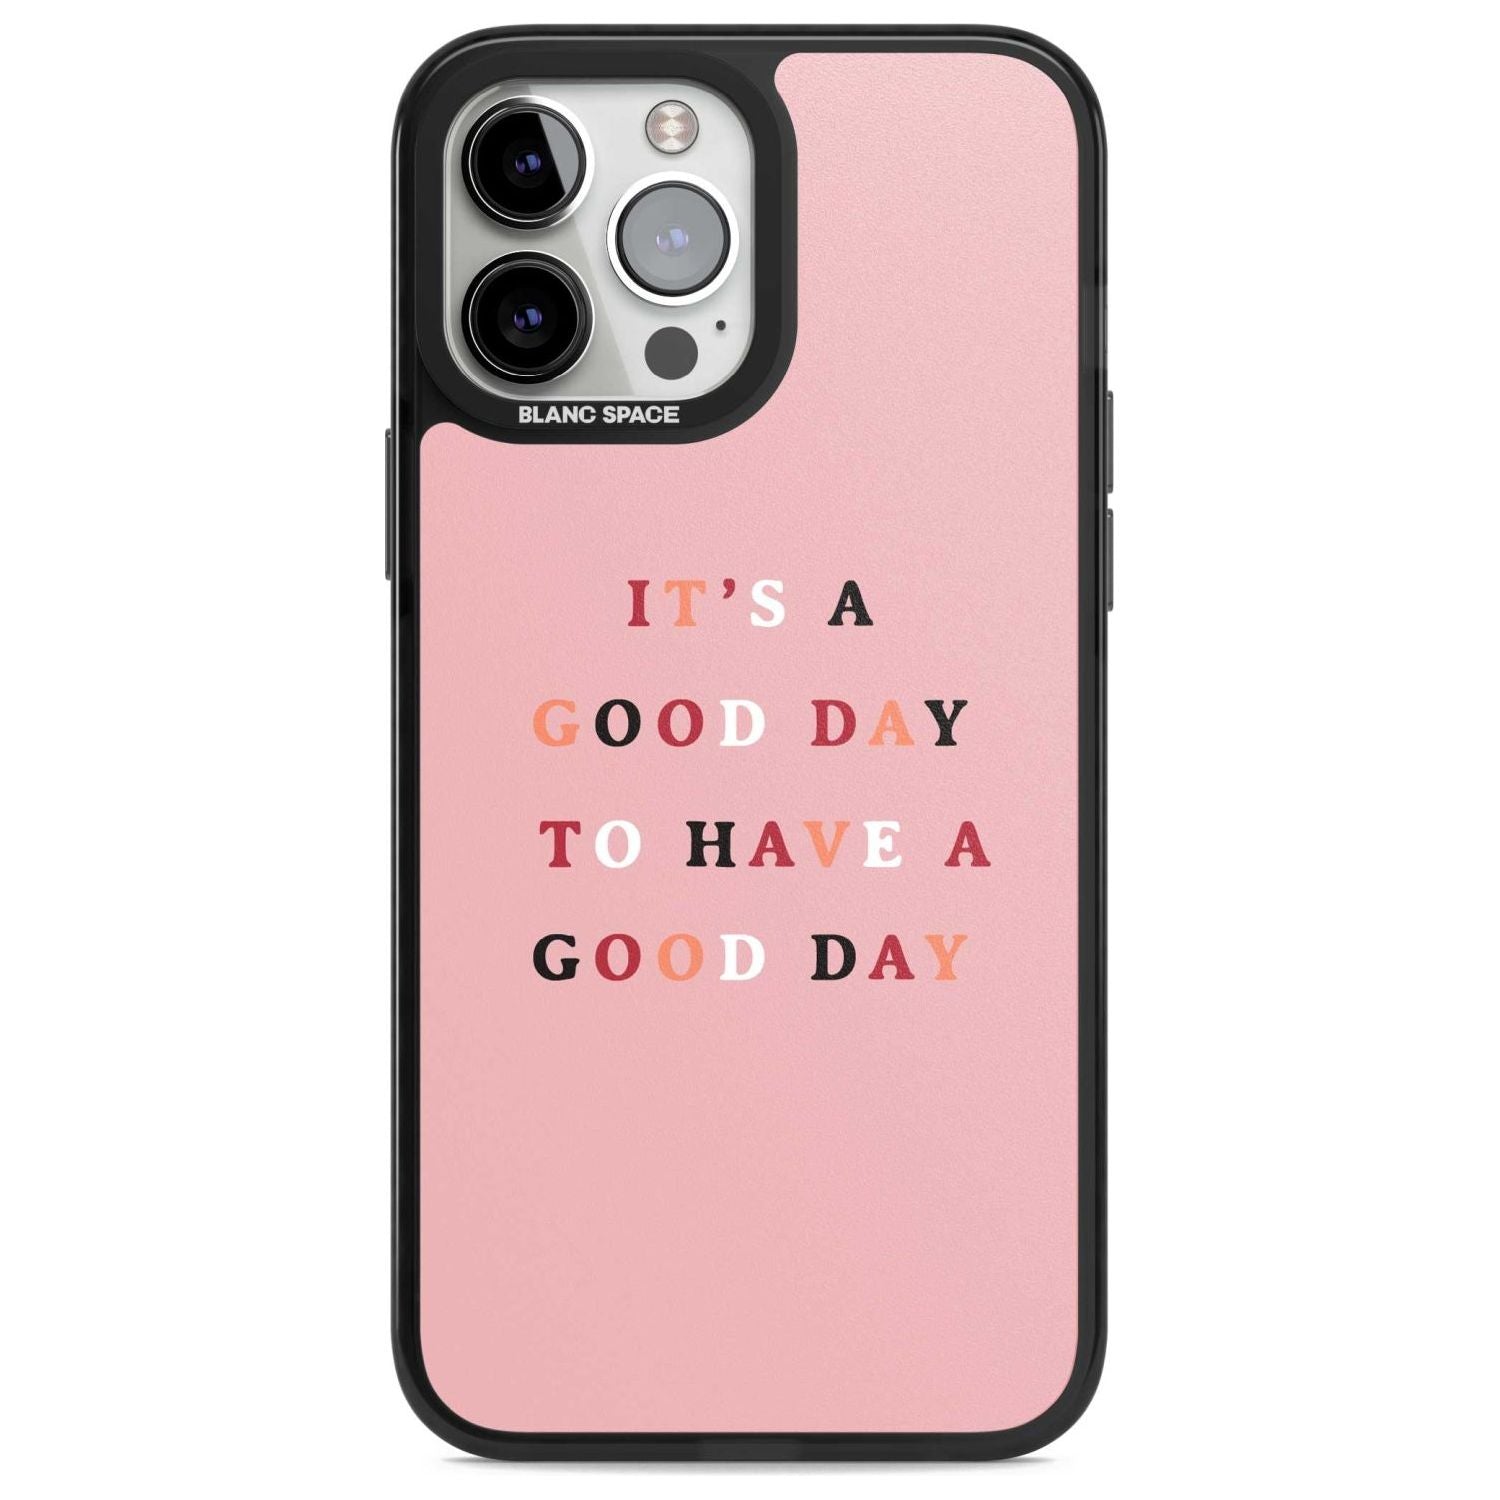 It's a good day to have a good day Phone Case iPhone 13 Pro Max / Magsafe Black Impact Case Blanc Space